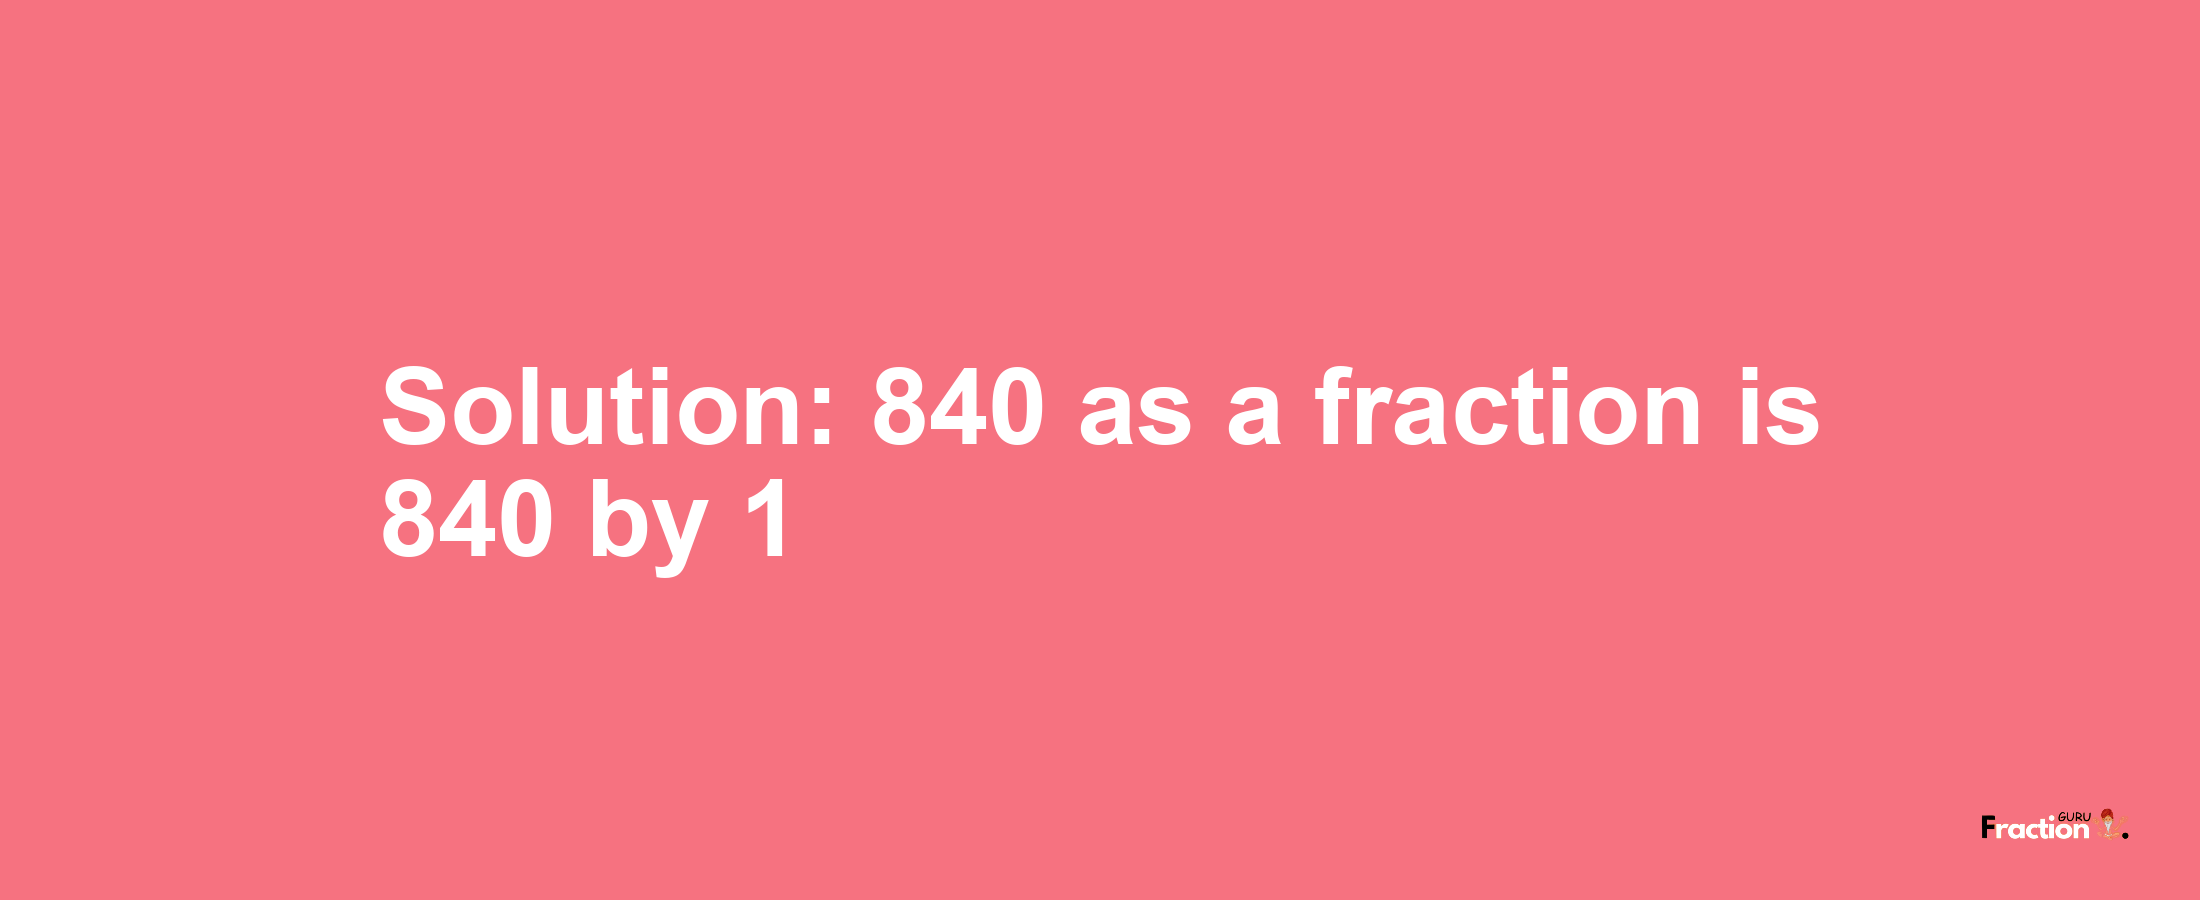 Solution:840 as a fraction is 840/1